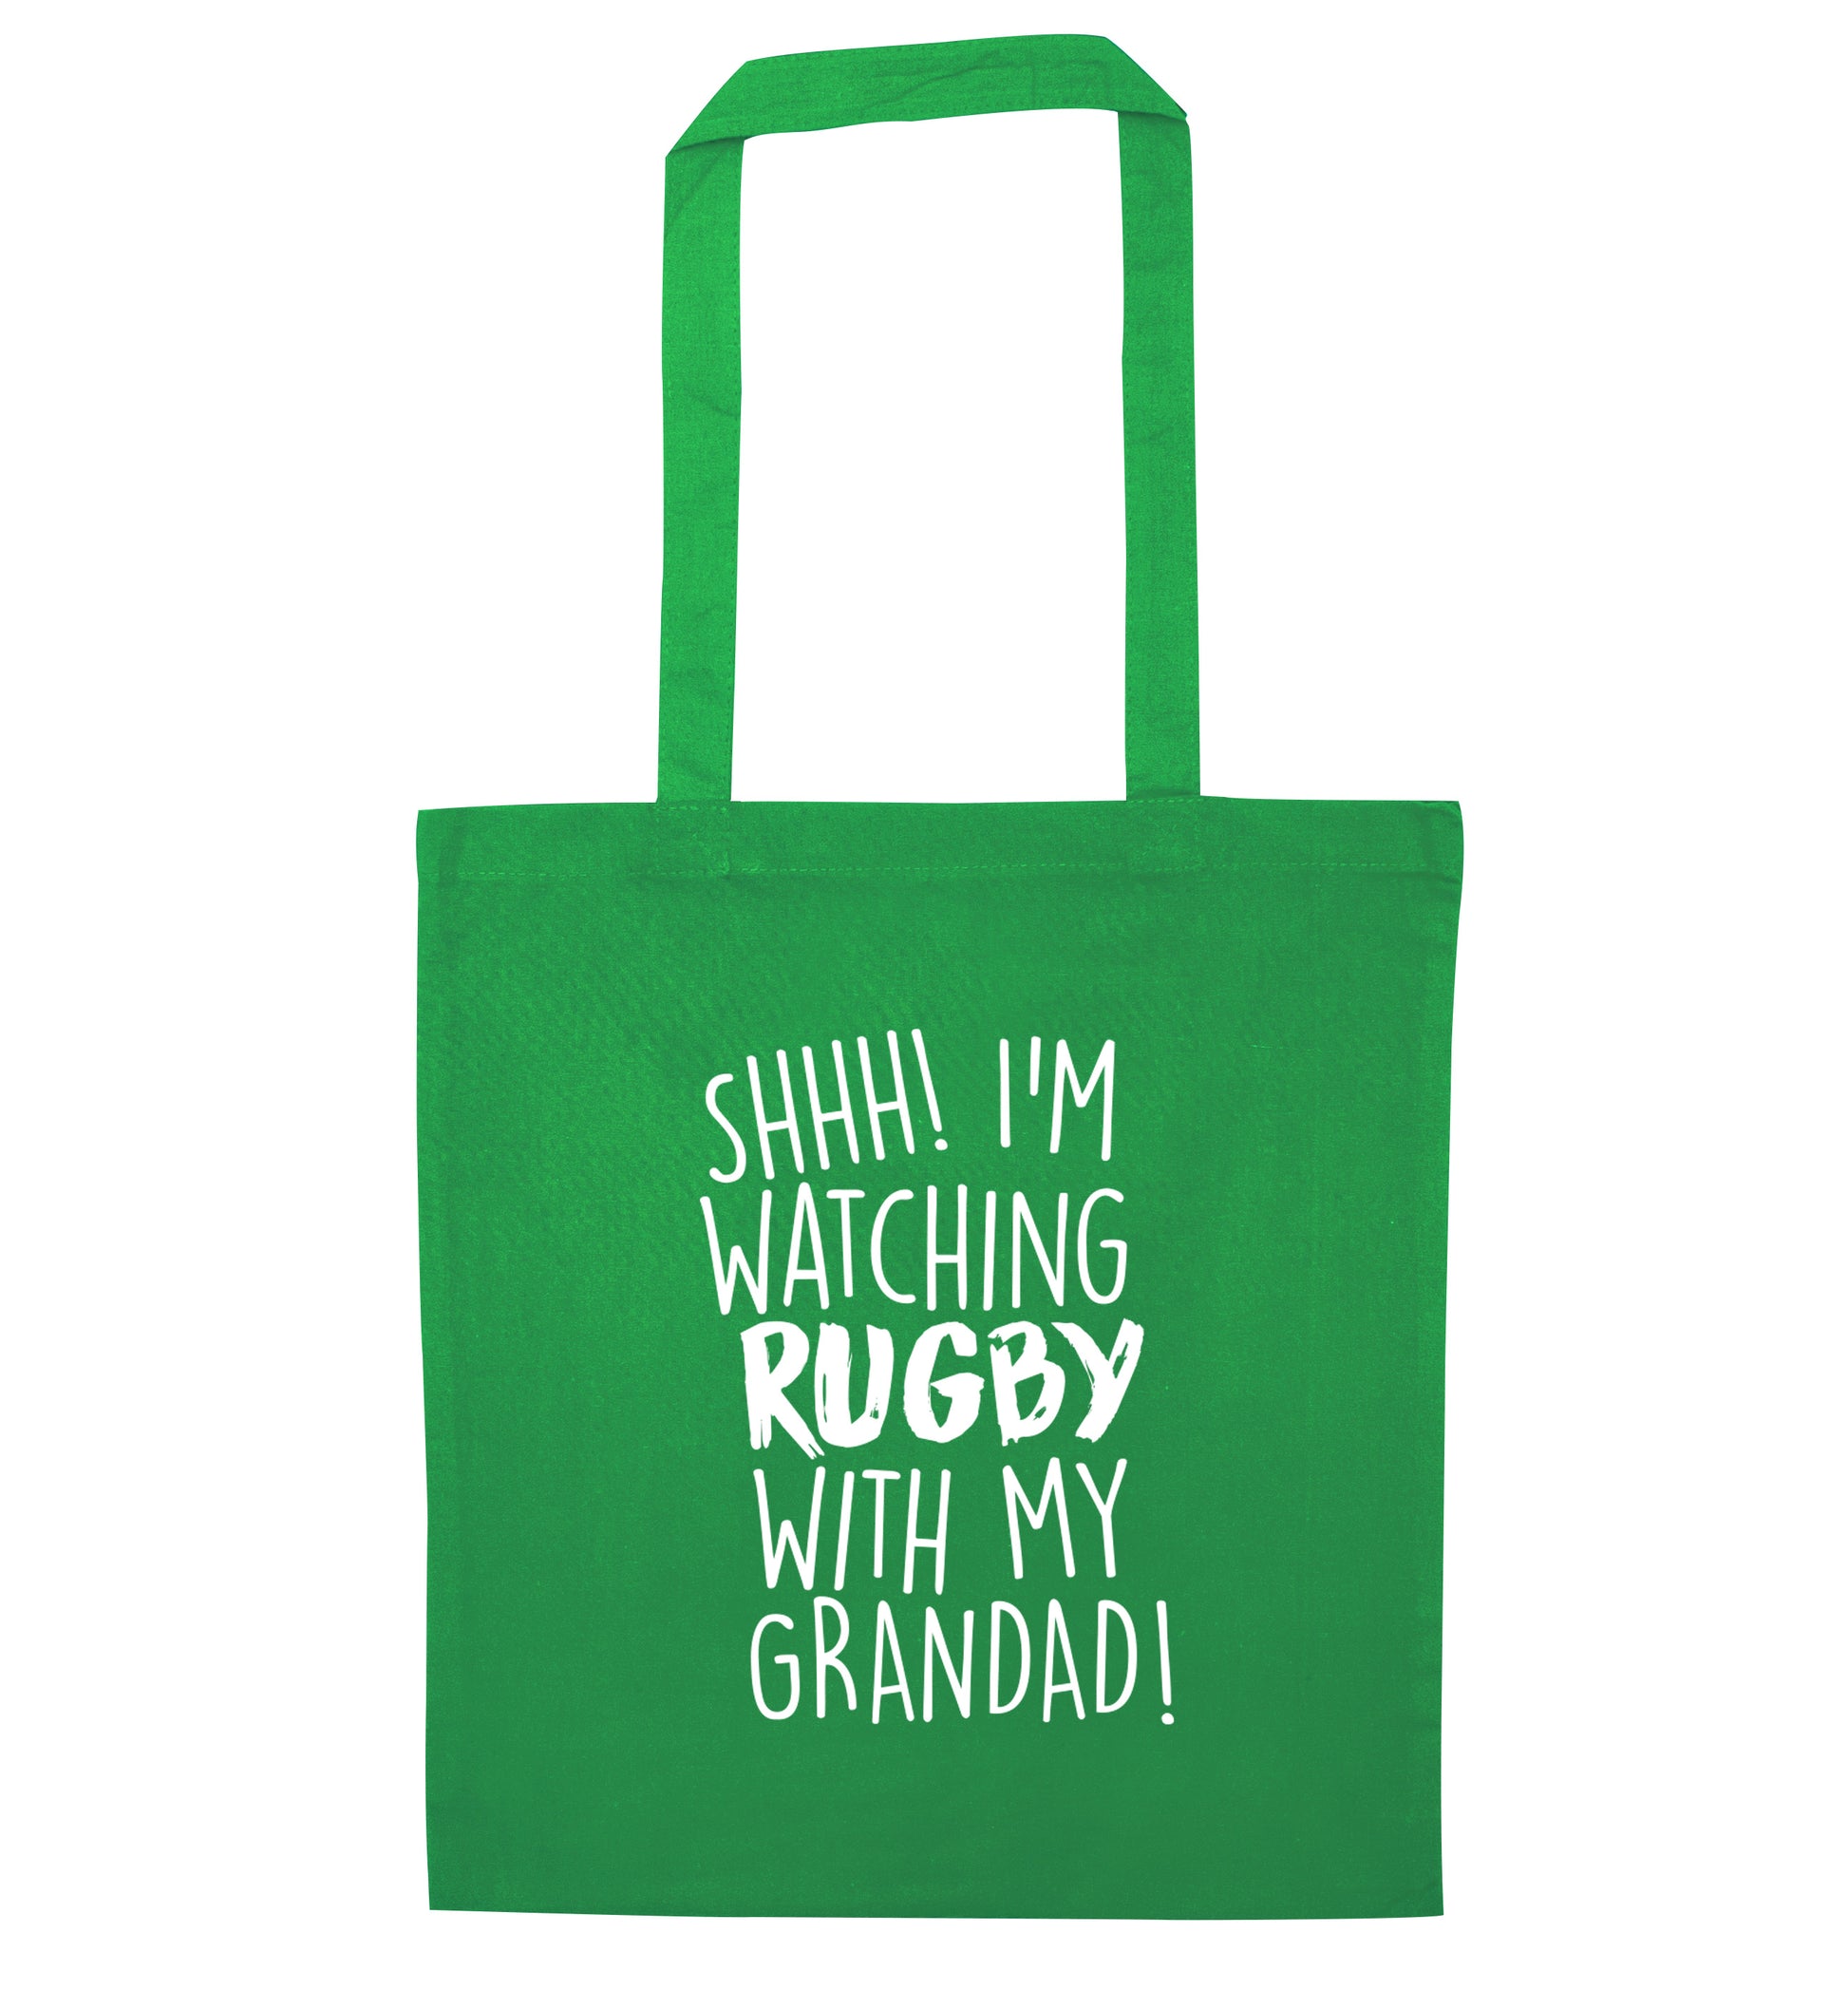 Shh I'm watching rugby with my grandaughter green tote bag